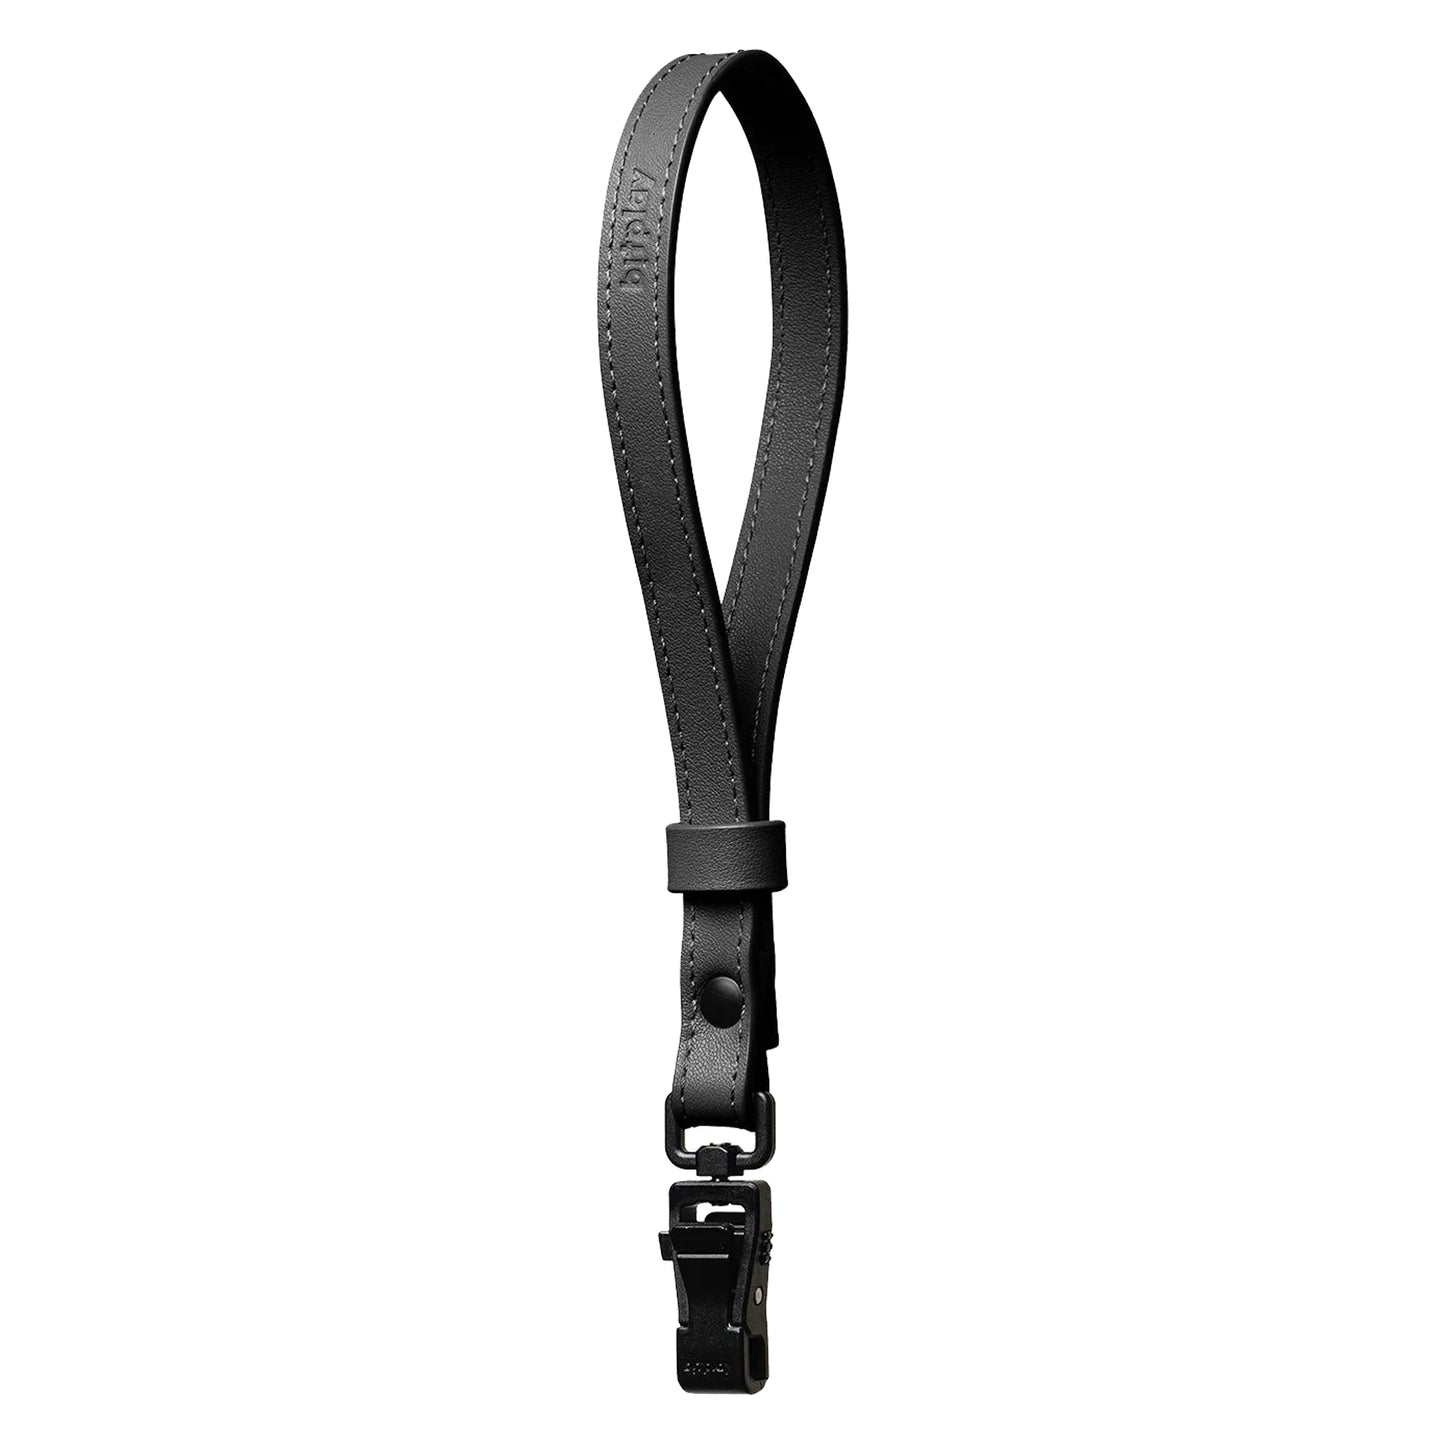 Bitplay Genuine Leather Wrist Strap 12mm Lanyard - Strap Adapter Included